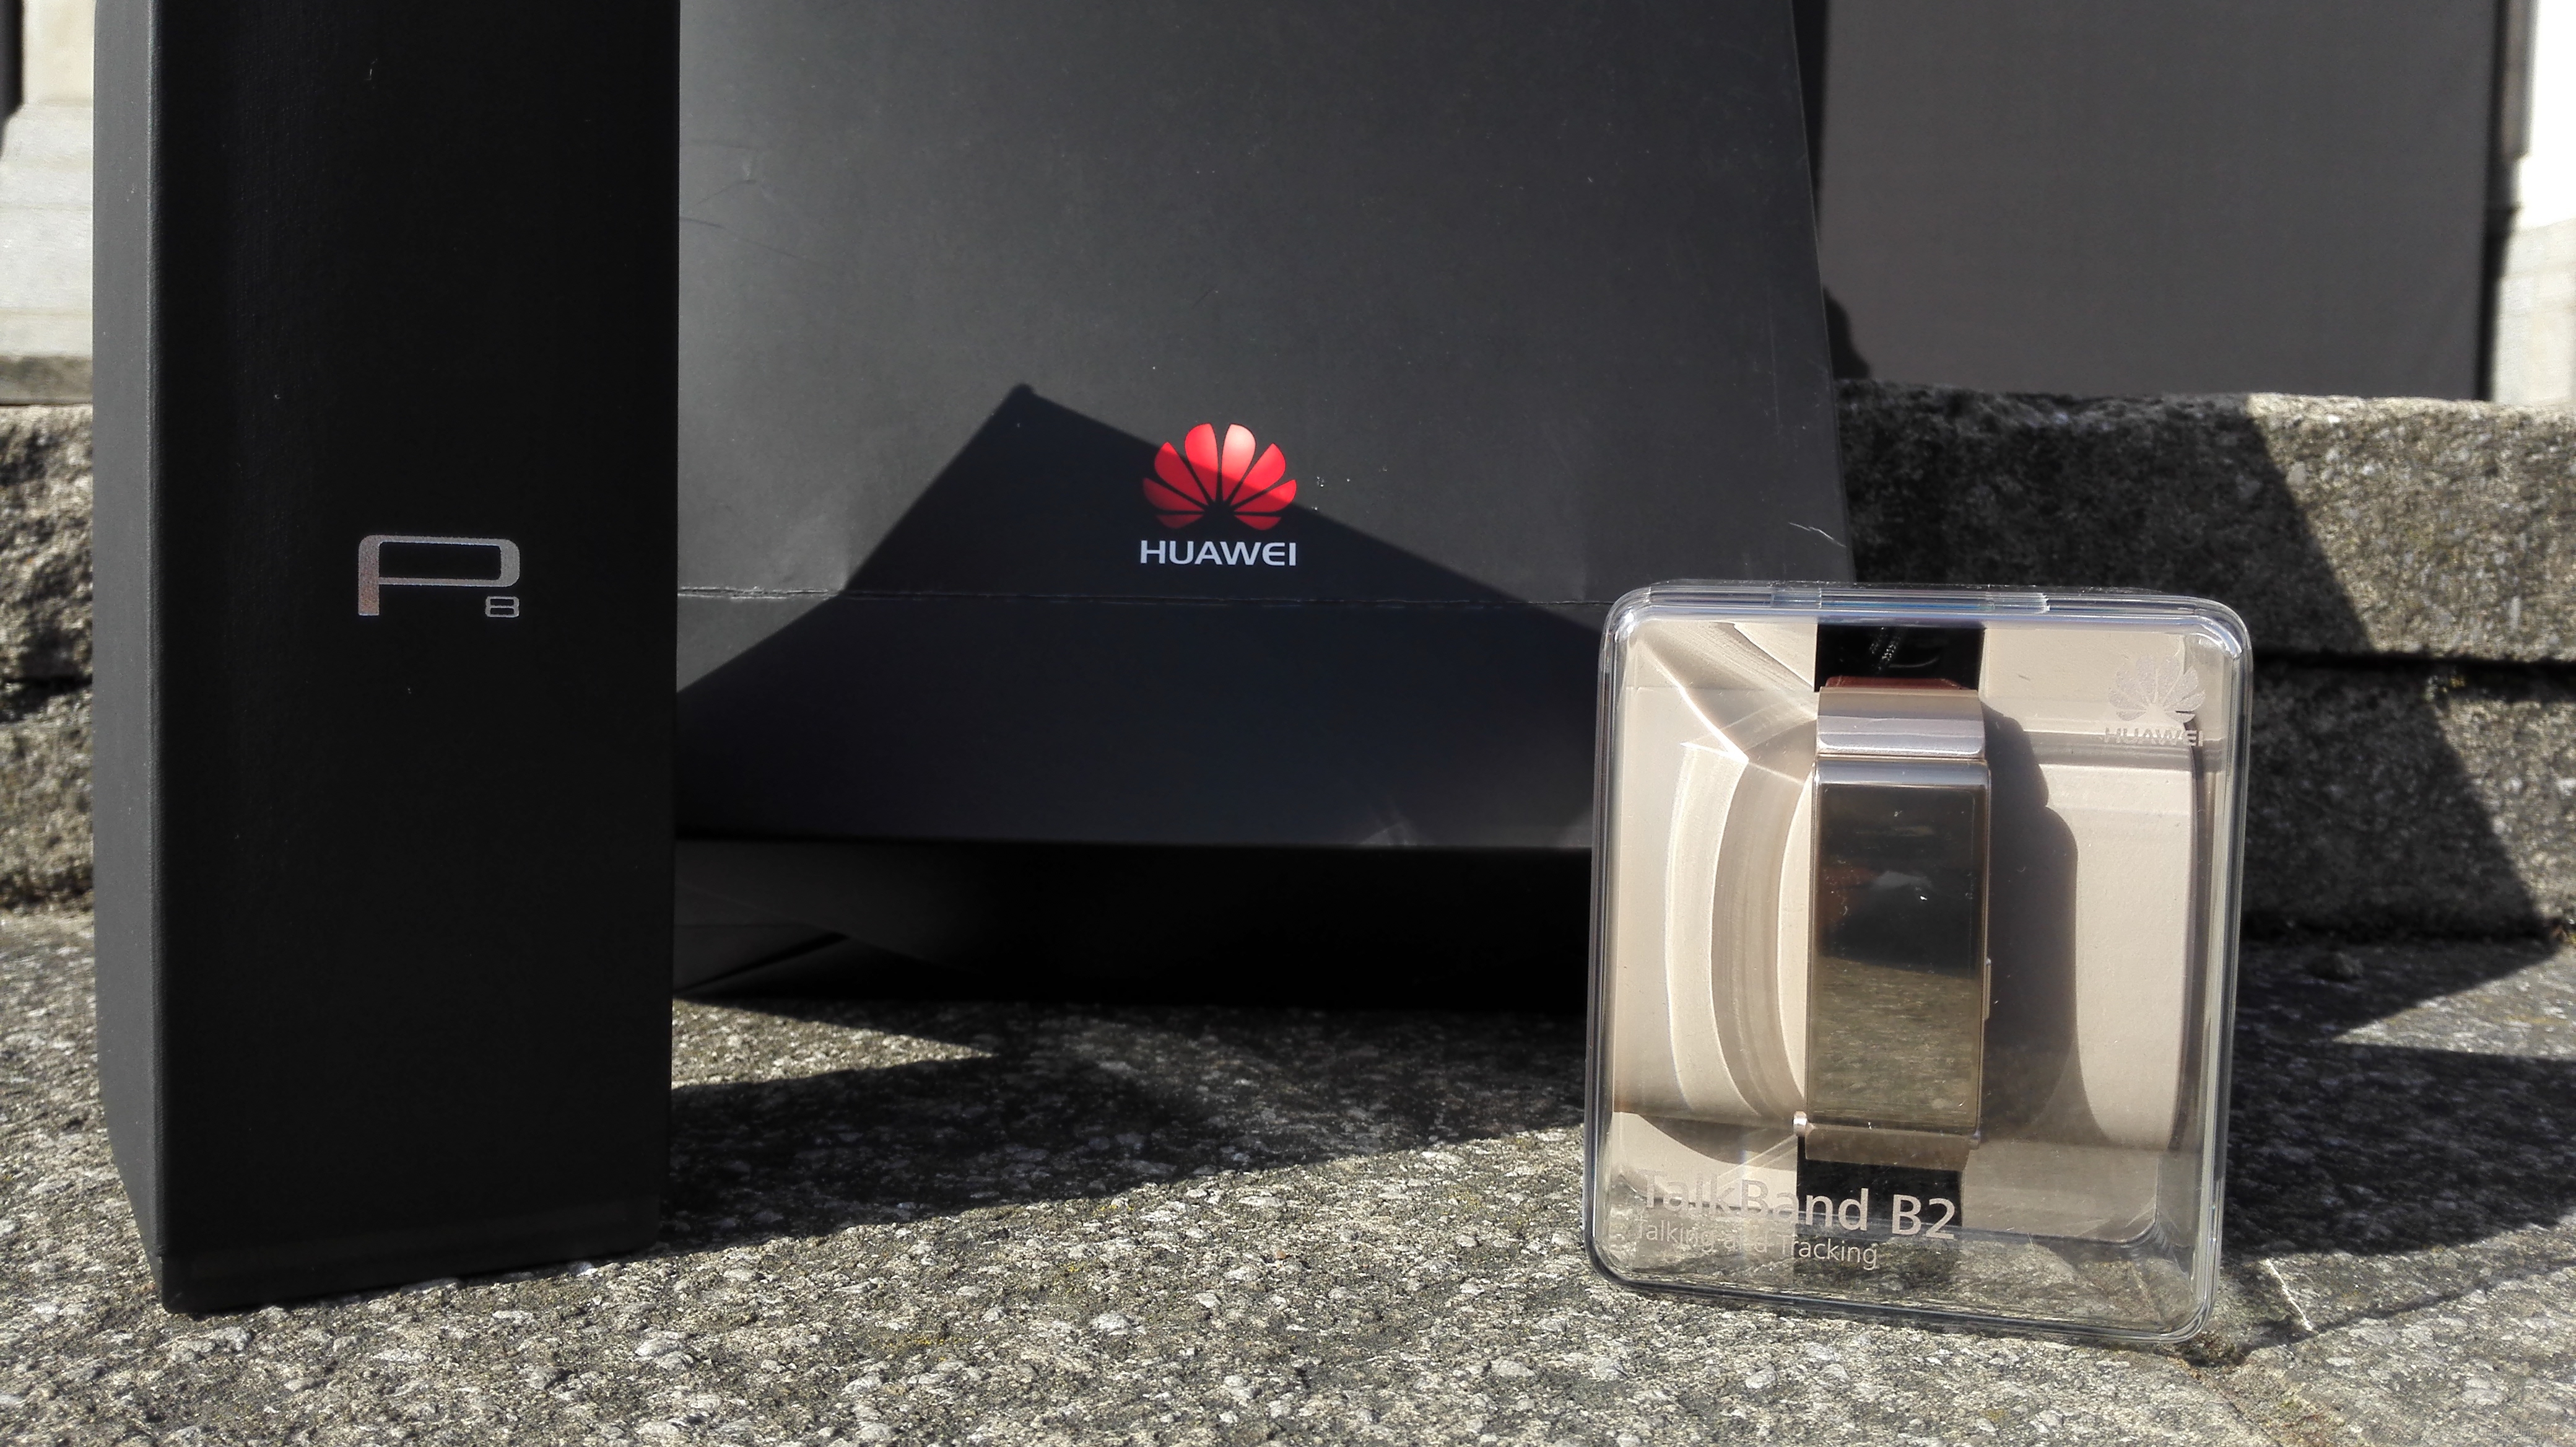 Huawei_P8_Event_London_2015_Giveaway